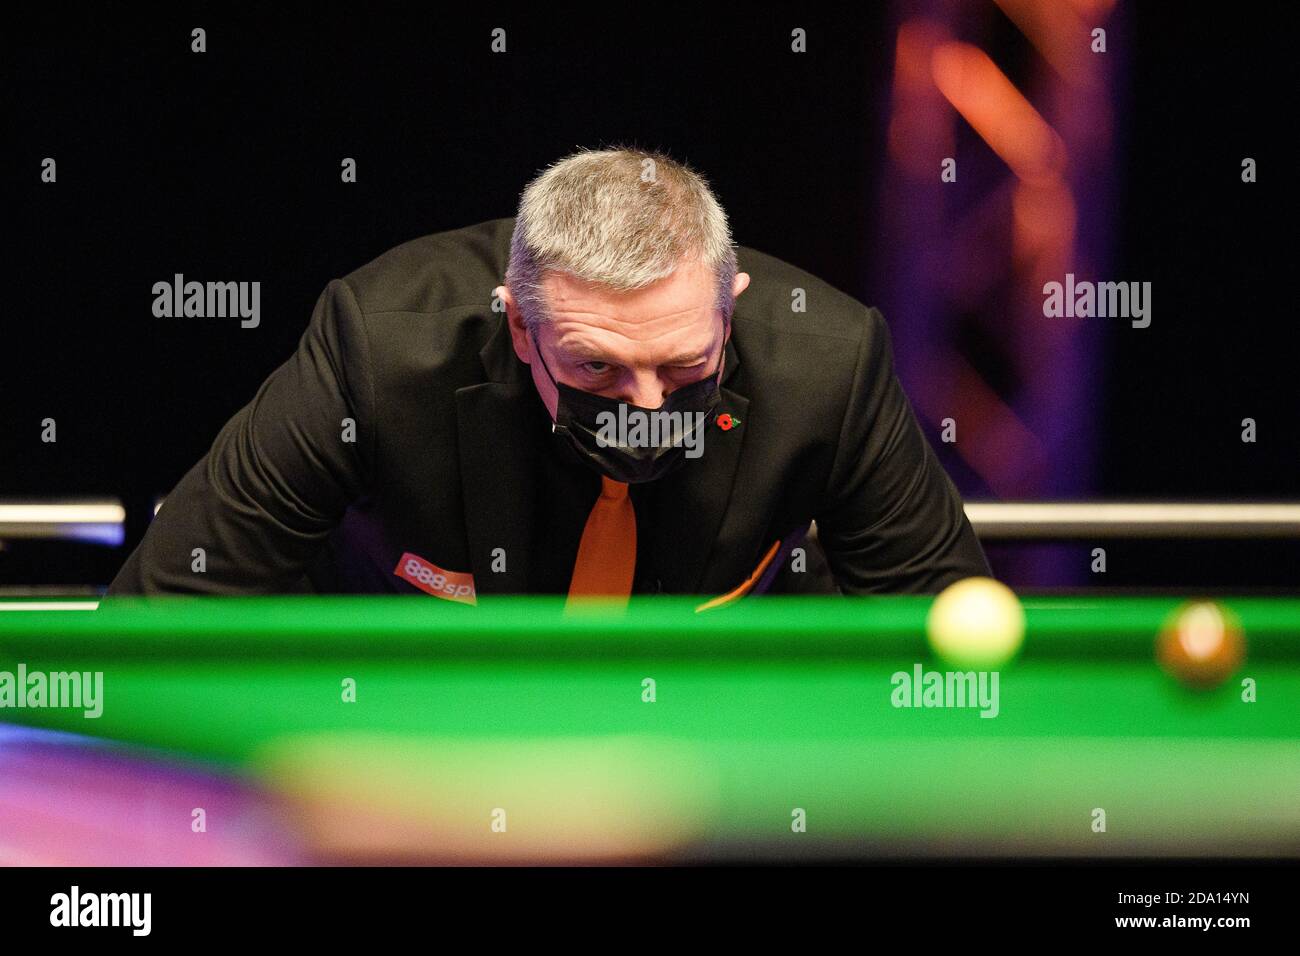 MILTON KEYNES, UNITED KINGDOM. 06th Nov, 2020. Referee: Rob Spencer checks the balls on the table during the  2020 888Sport Champion of Champions Snooker Final between Neil Robertson and Mark Allen at Marshall Arena on Friday, November 06, 2020 in MILTON KEYNES, ENGLAND. Credit: Taka G Wu/Alamy Live News Stock Photo